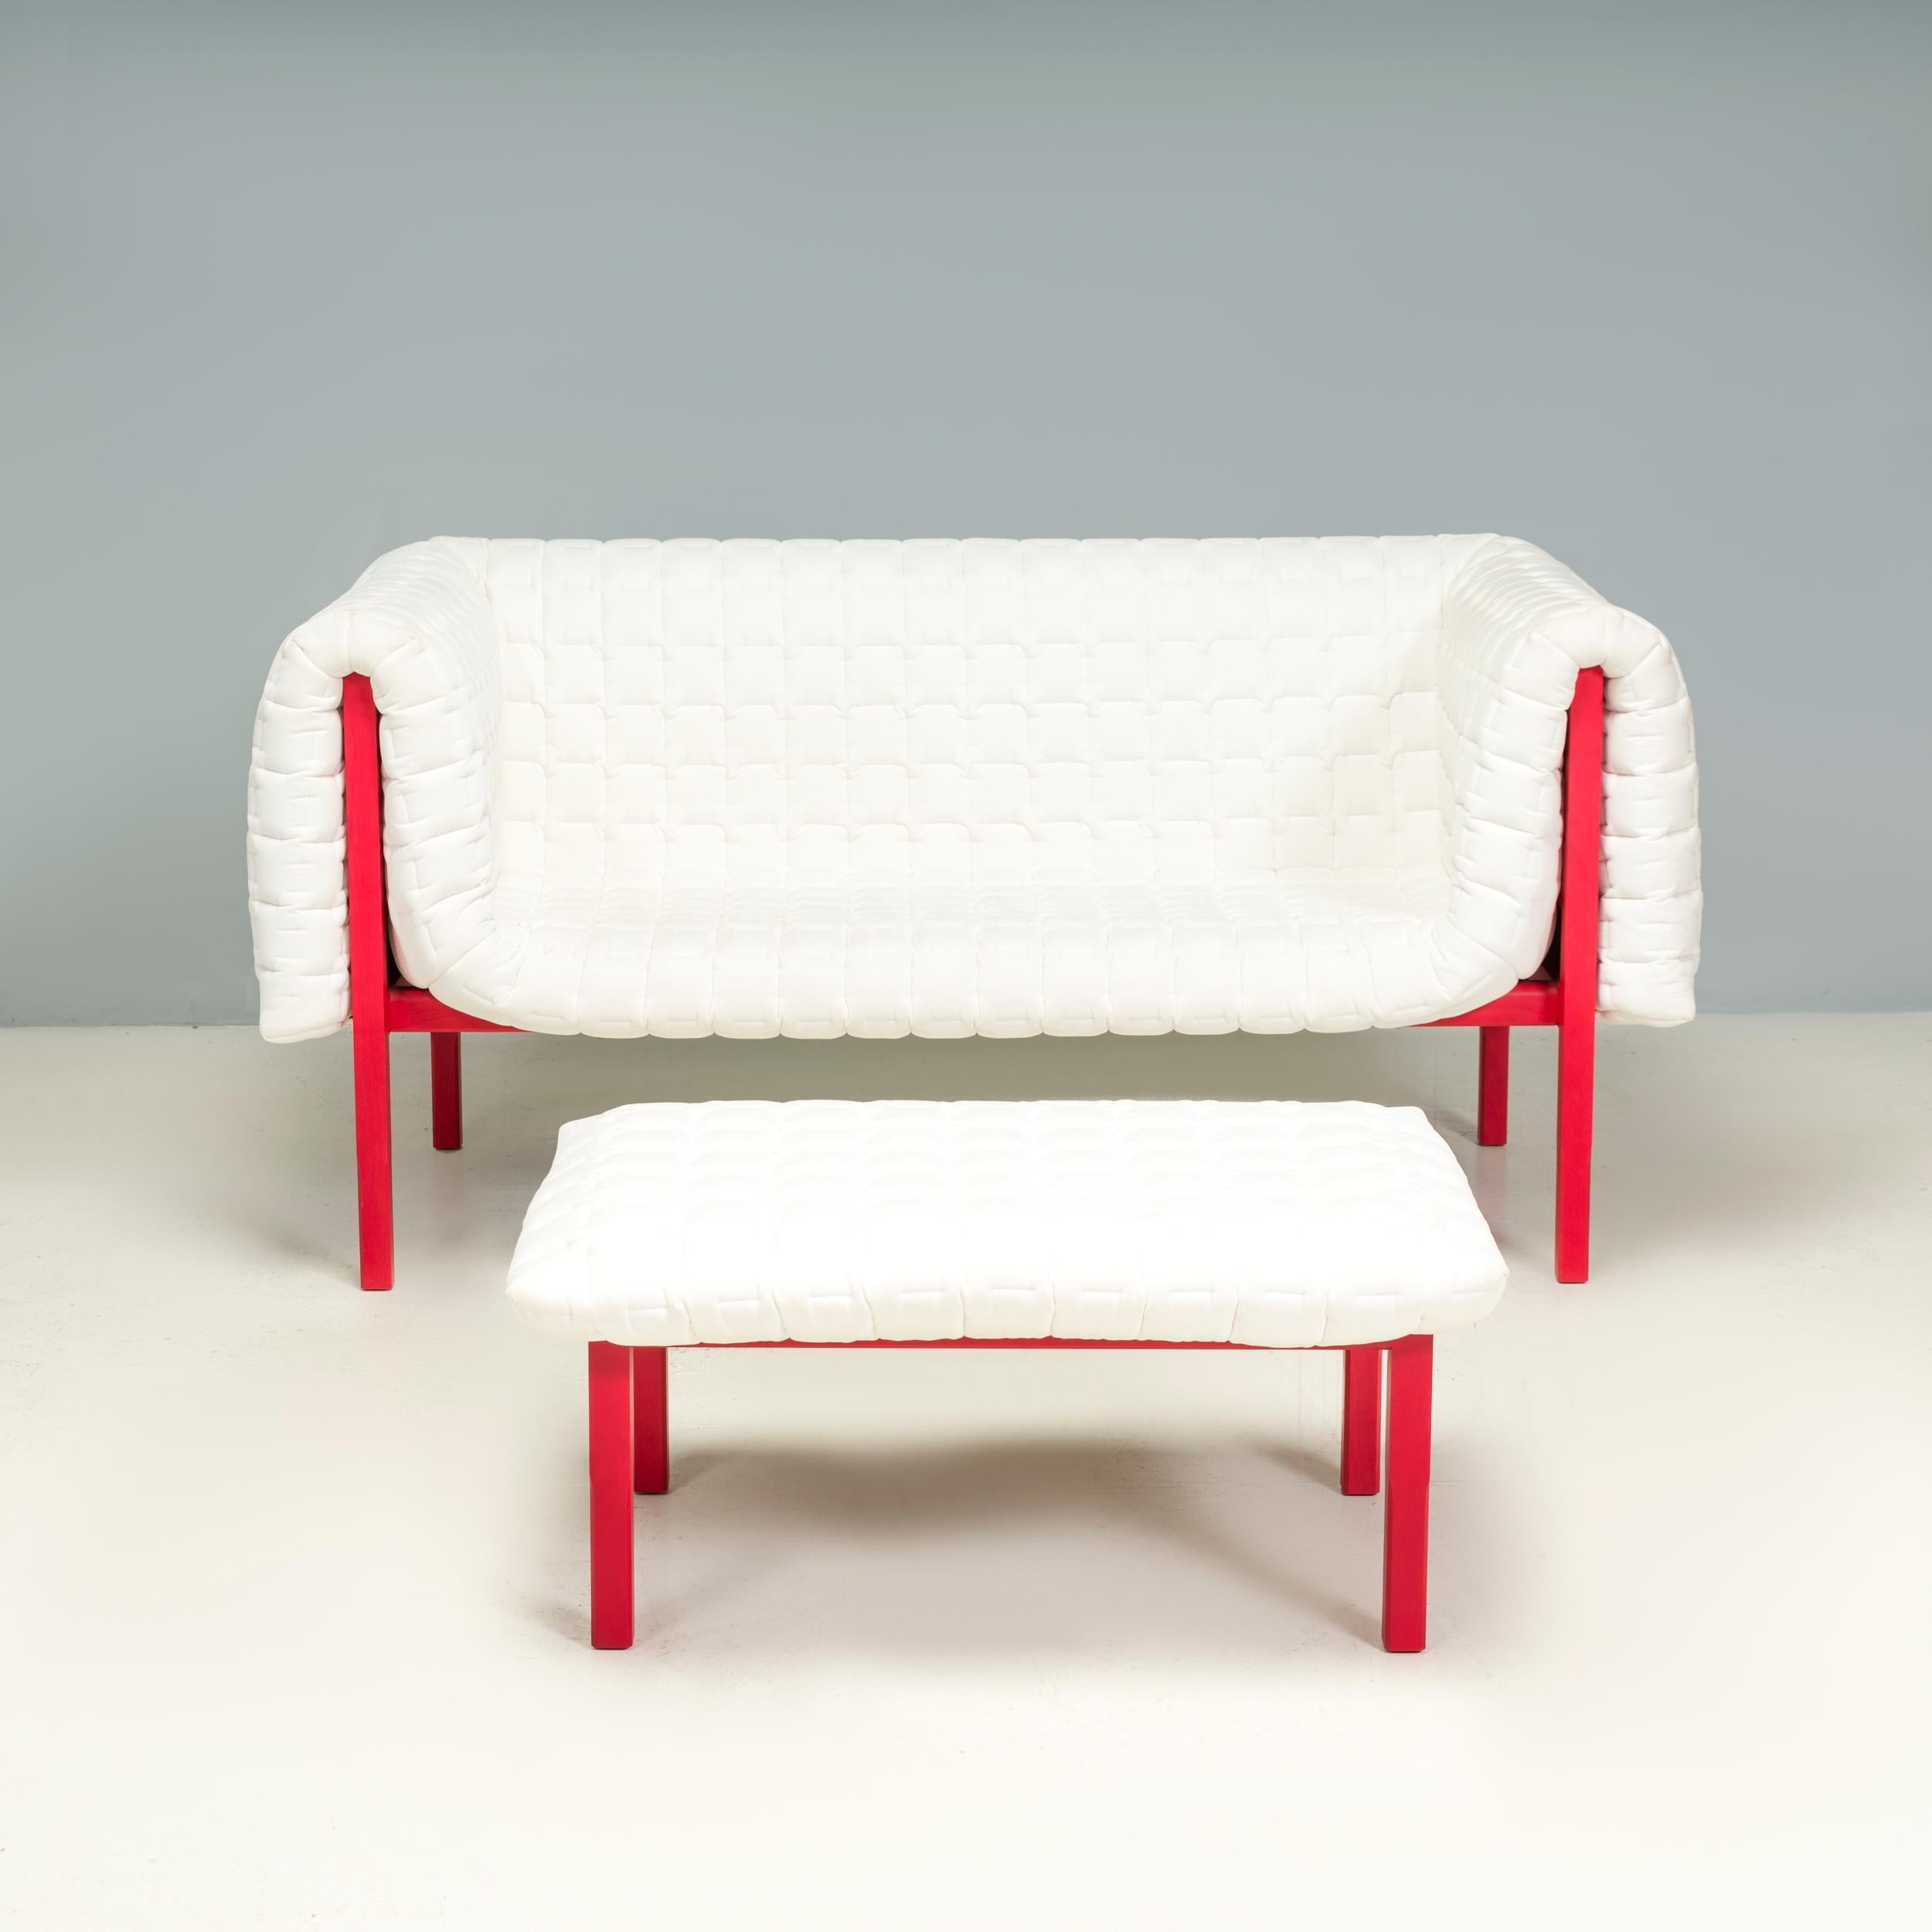 Inga Sempe for Ligne Rose’ Ruche Quilted Settee in white on solid beech structure stained red and footstool

Originally designed by Inga Sempé for Ligne Roset in 2010, the Ruché sofa is a bold and bright piece of design. 

This sofa is constructed